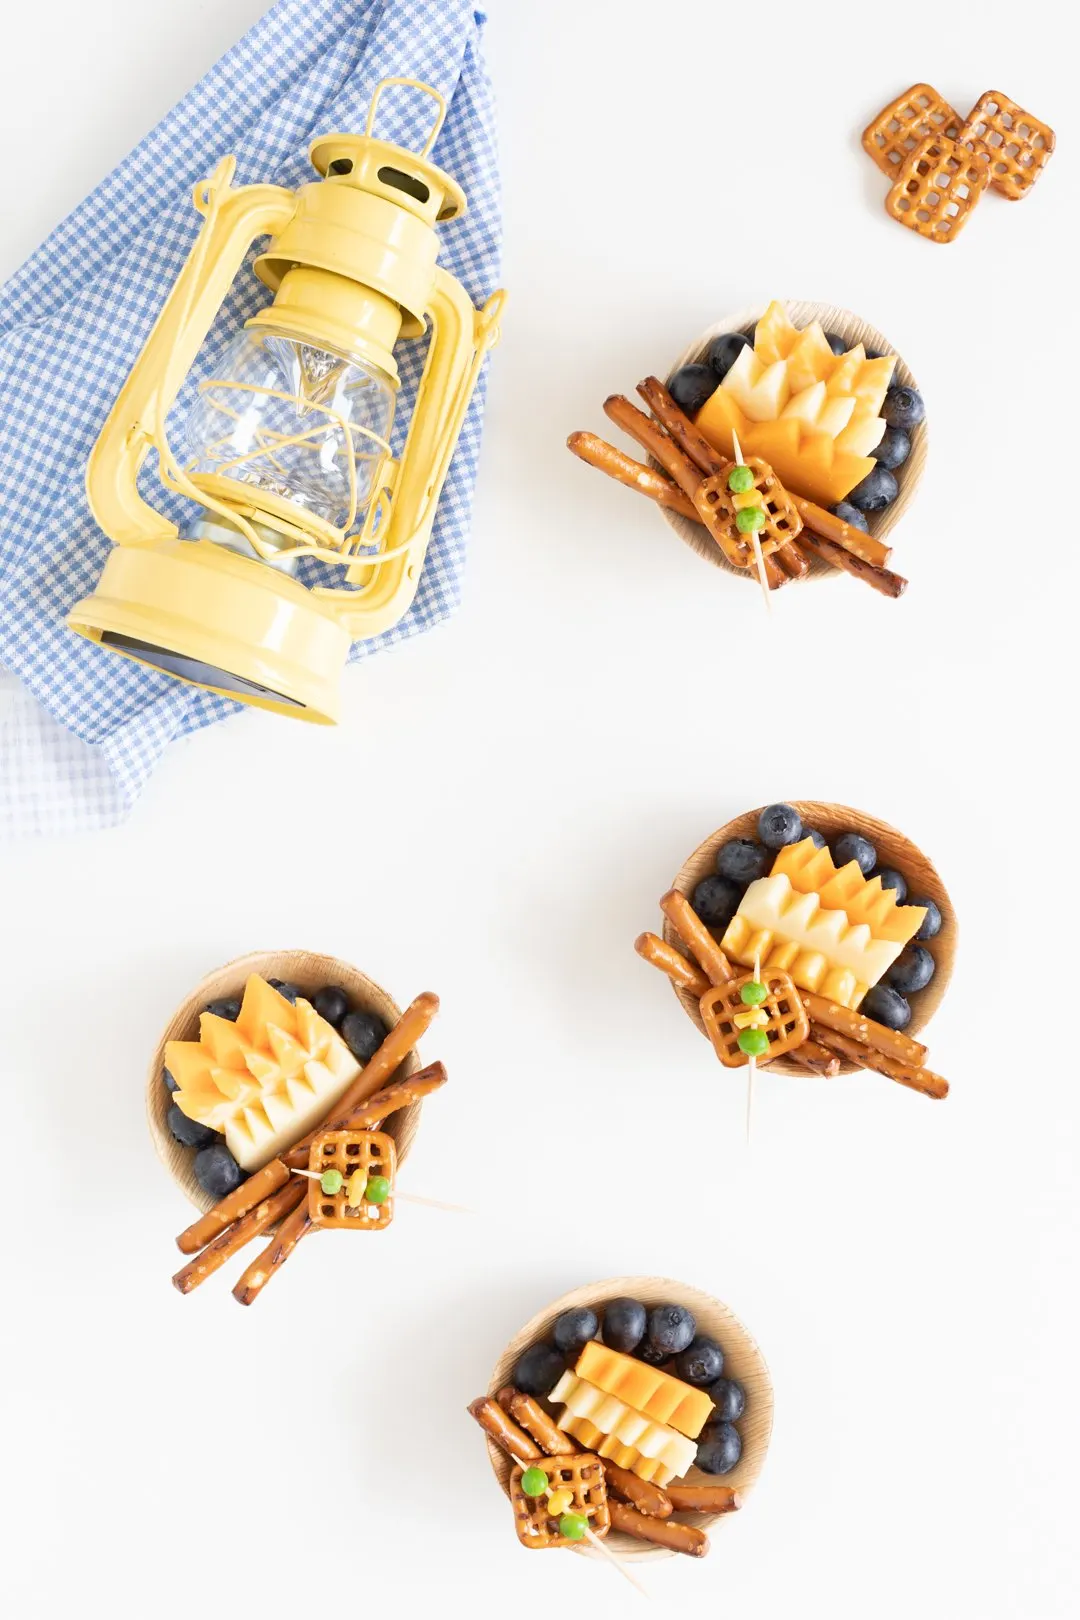 over the top photo of campfire themed snacks for kids. multiple cheese layers trimmed to look like a fire.